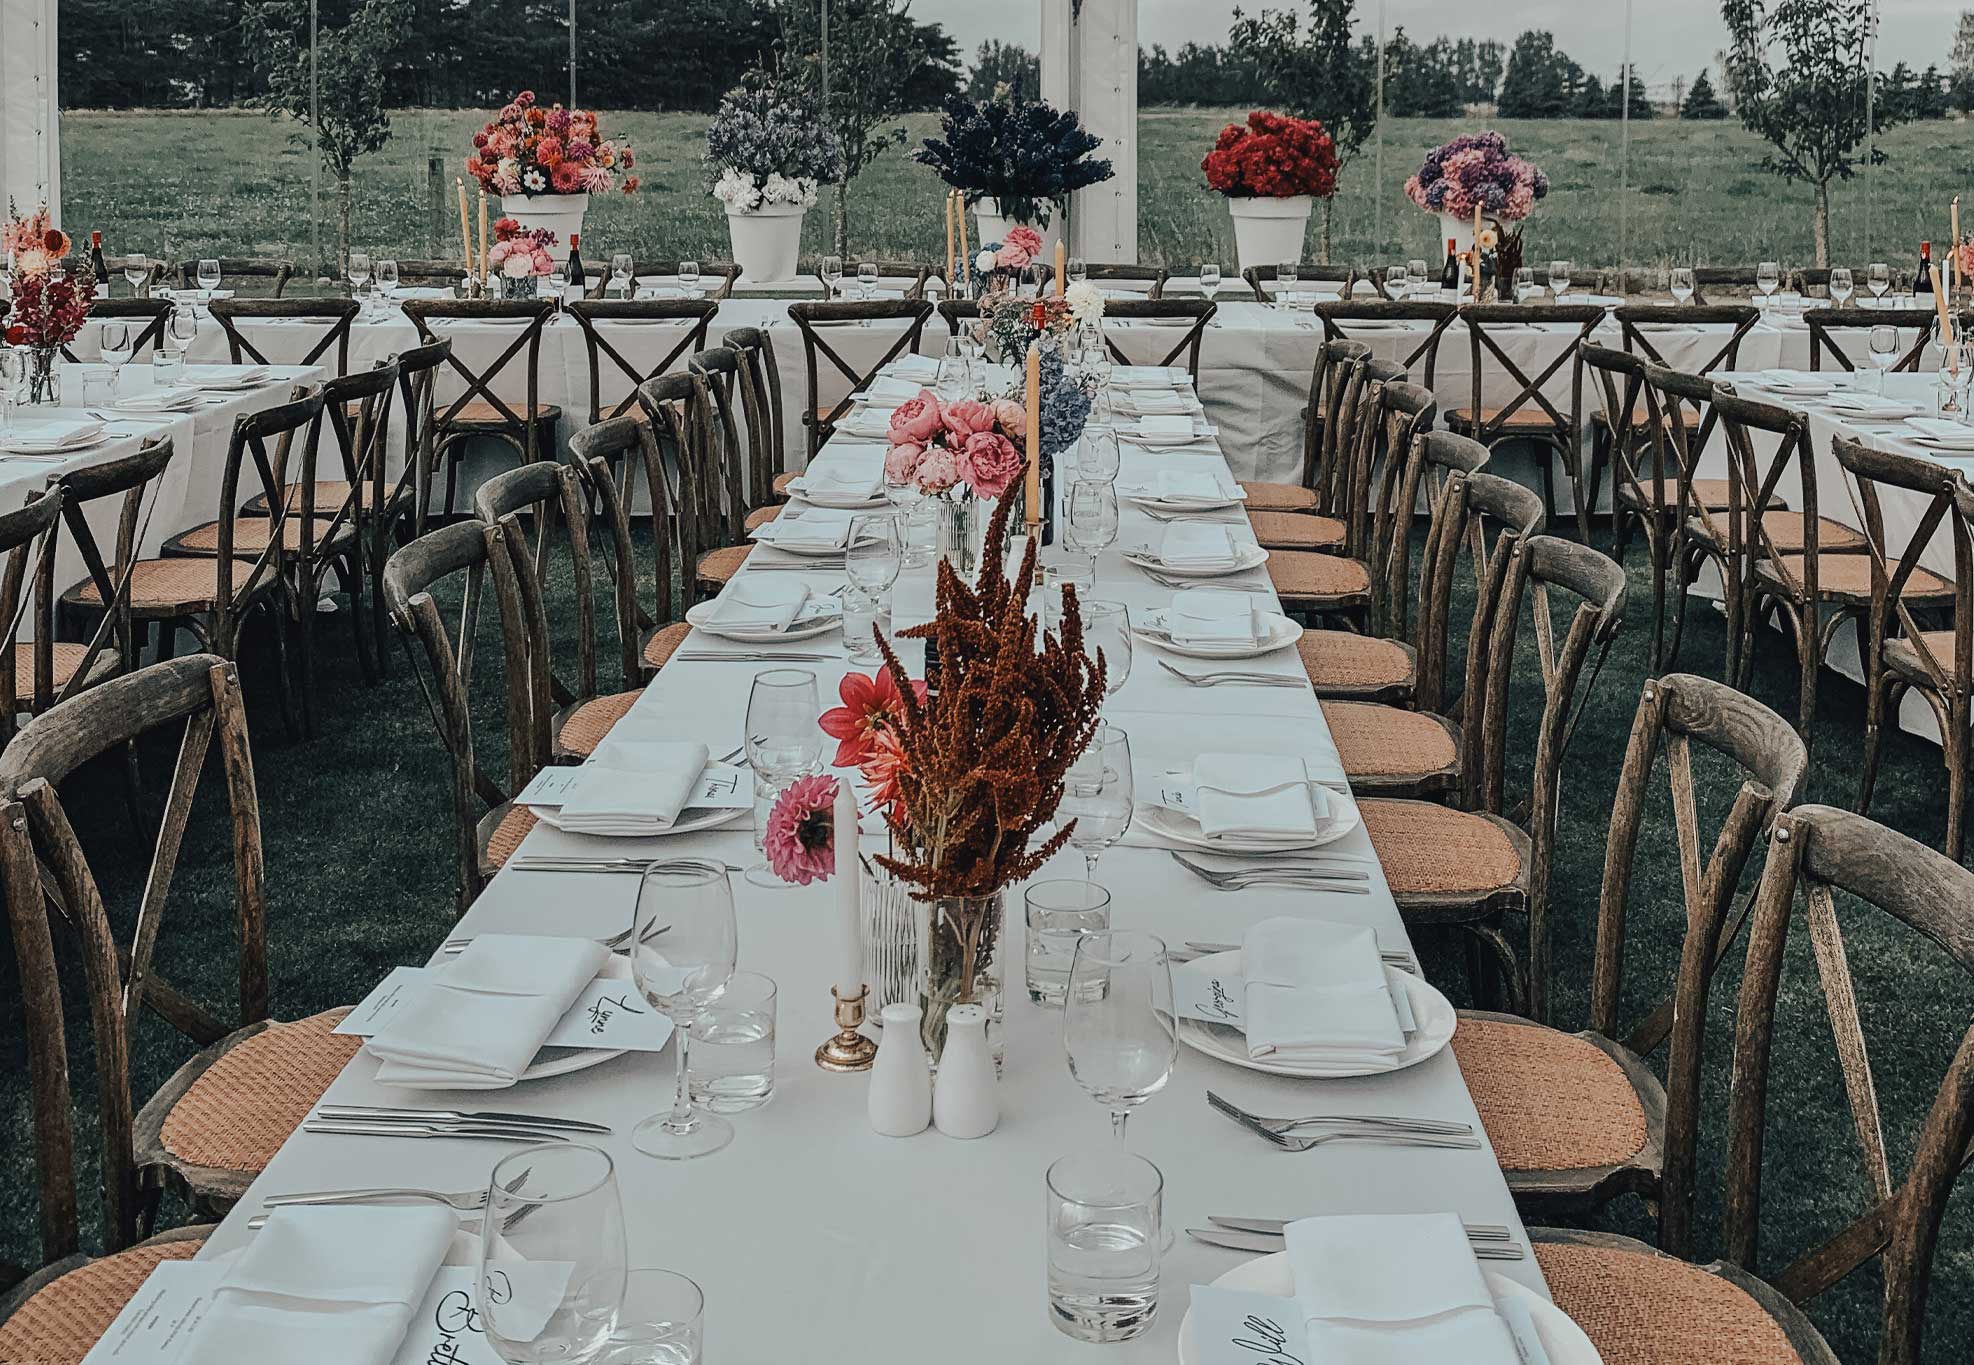 silk-estate-marquee-weddingxs-and-events-styling-and-hire-crockery-dinner-plate-1